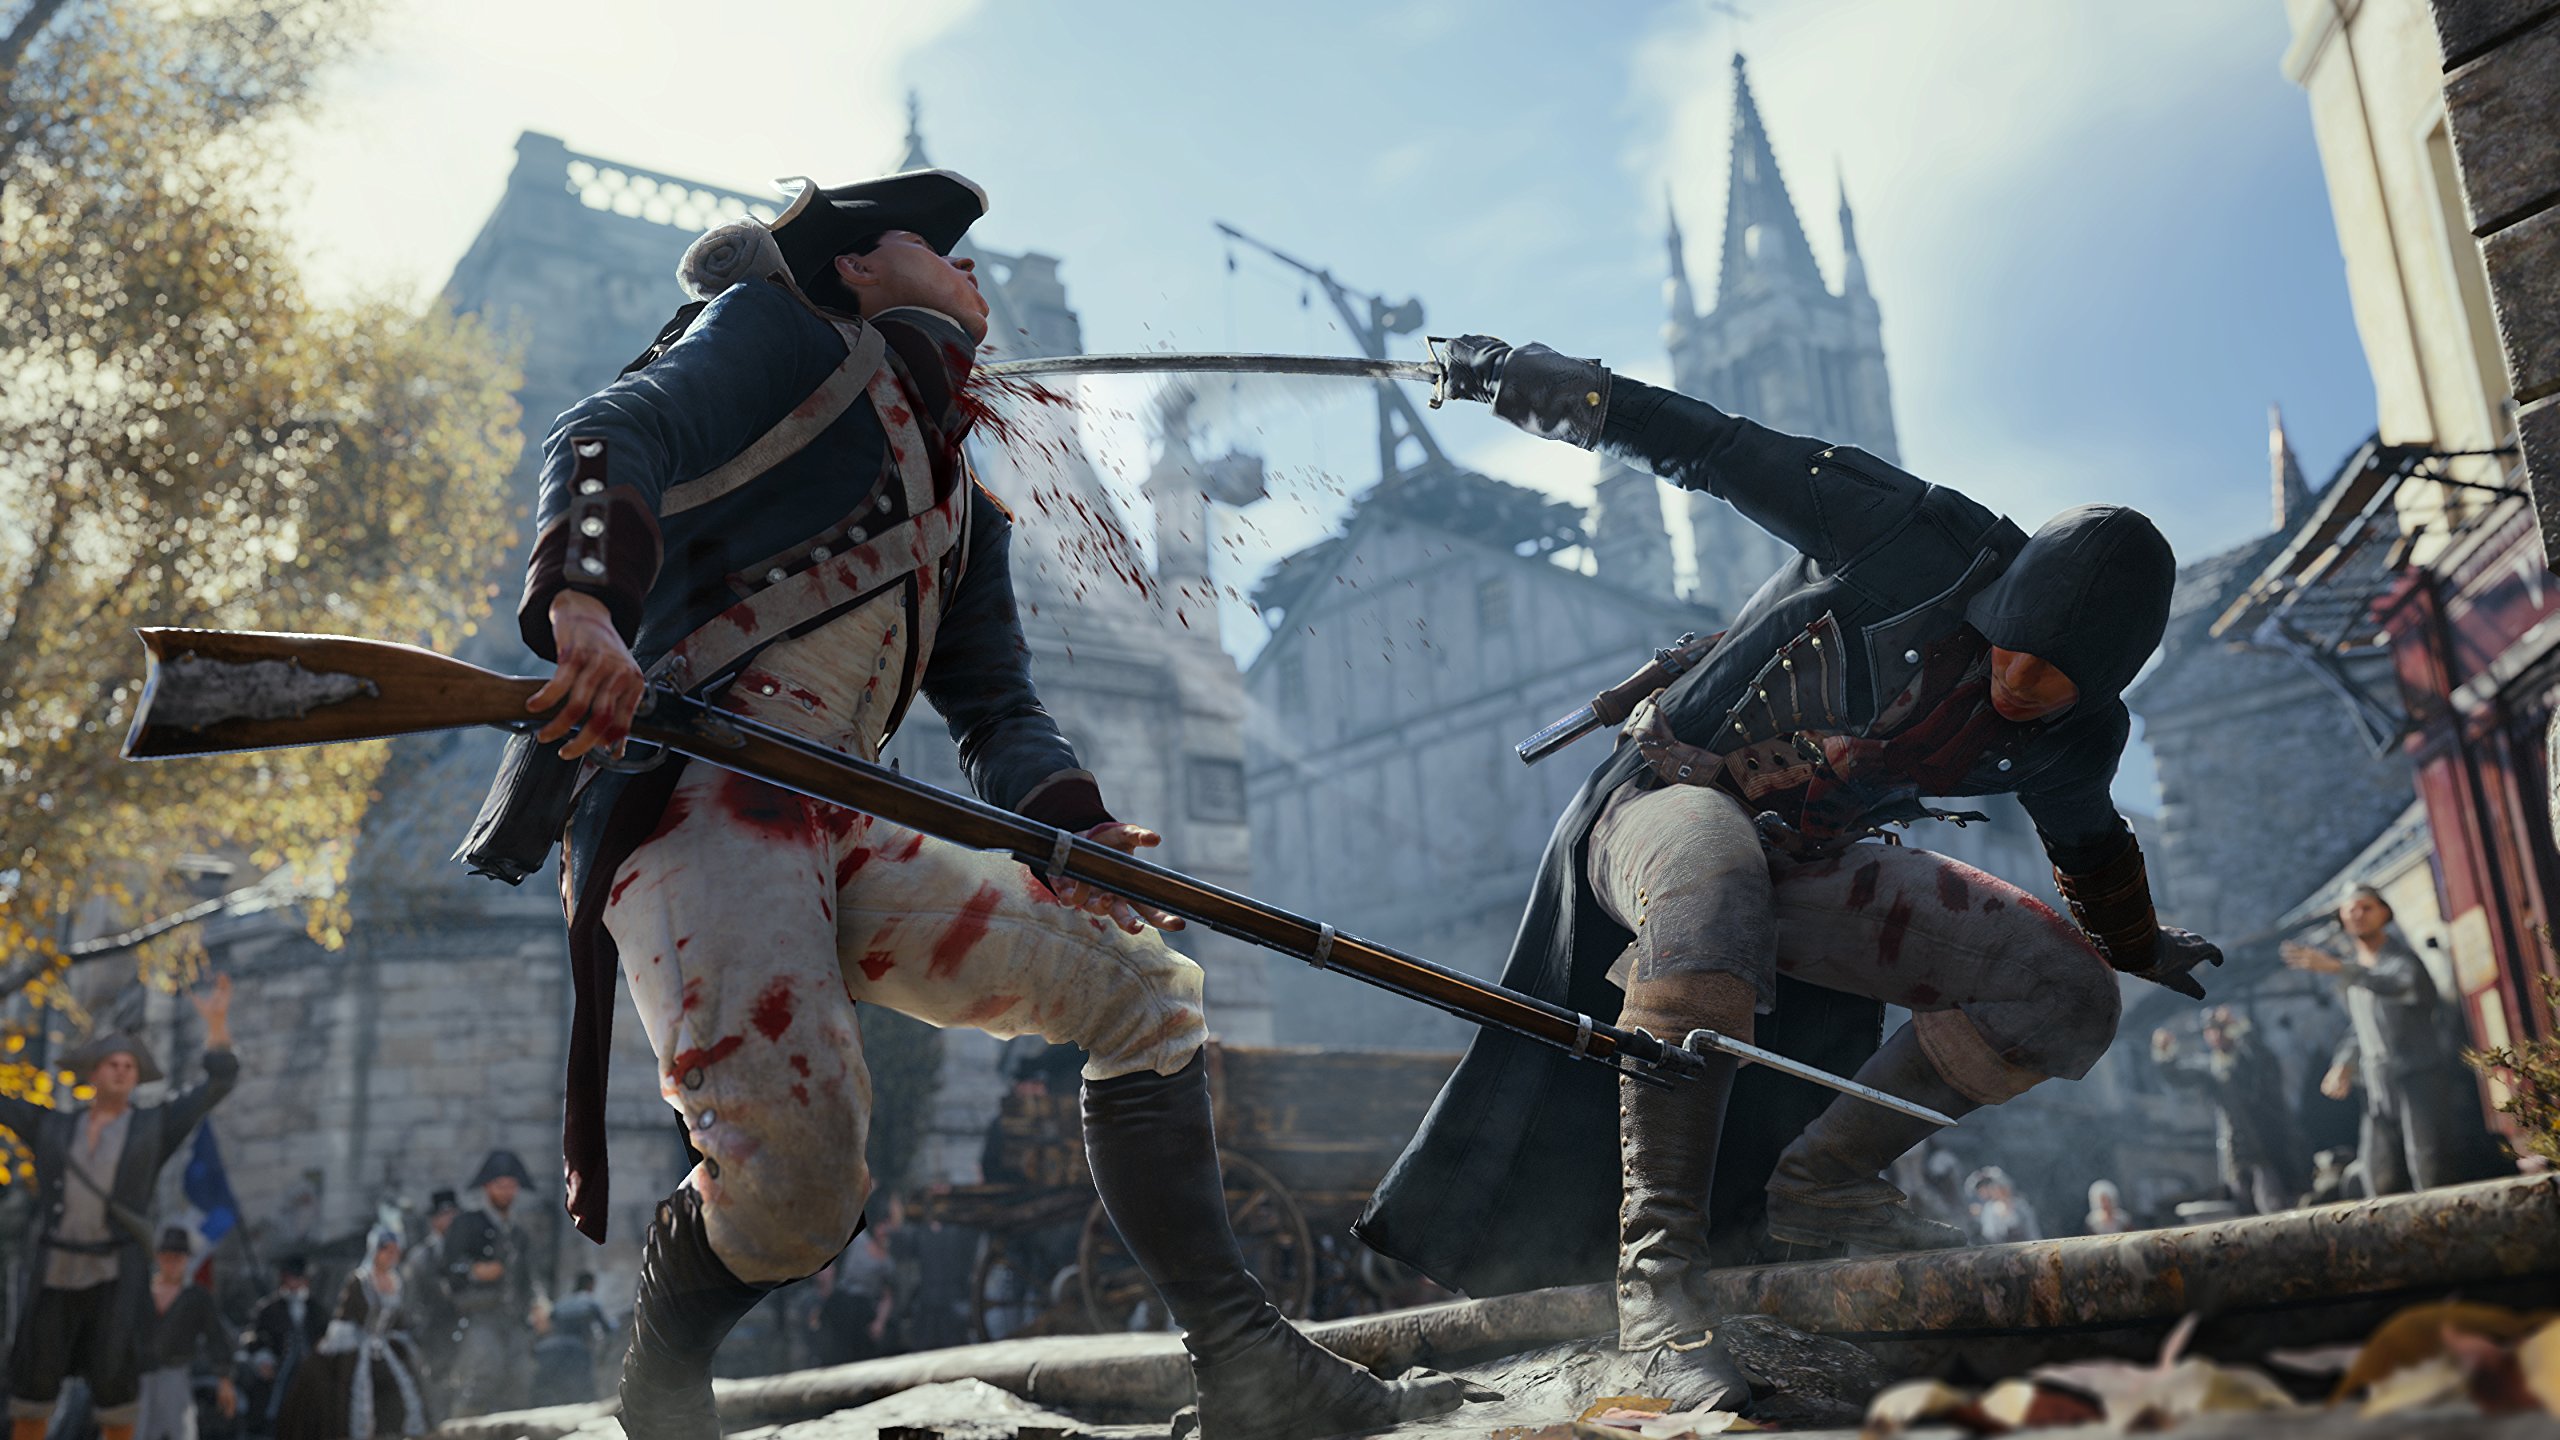 Assassin's Creed Unity | PC Code - Ubisoft Connect